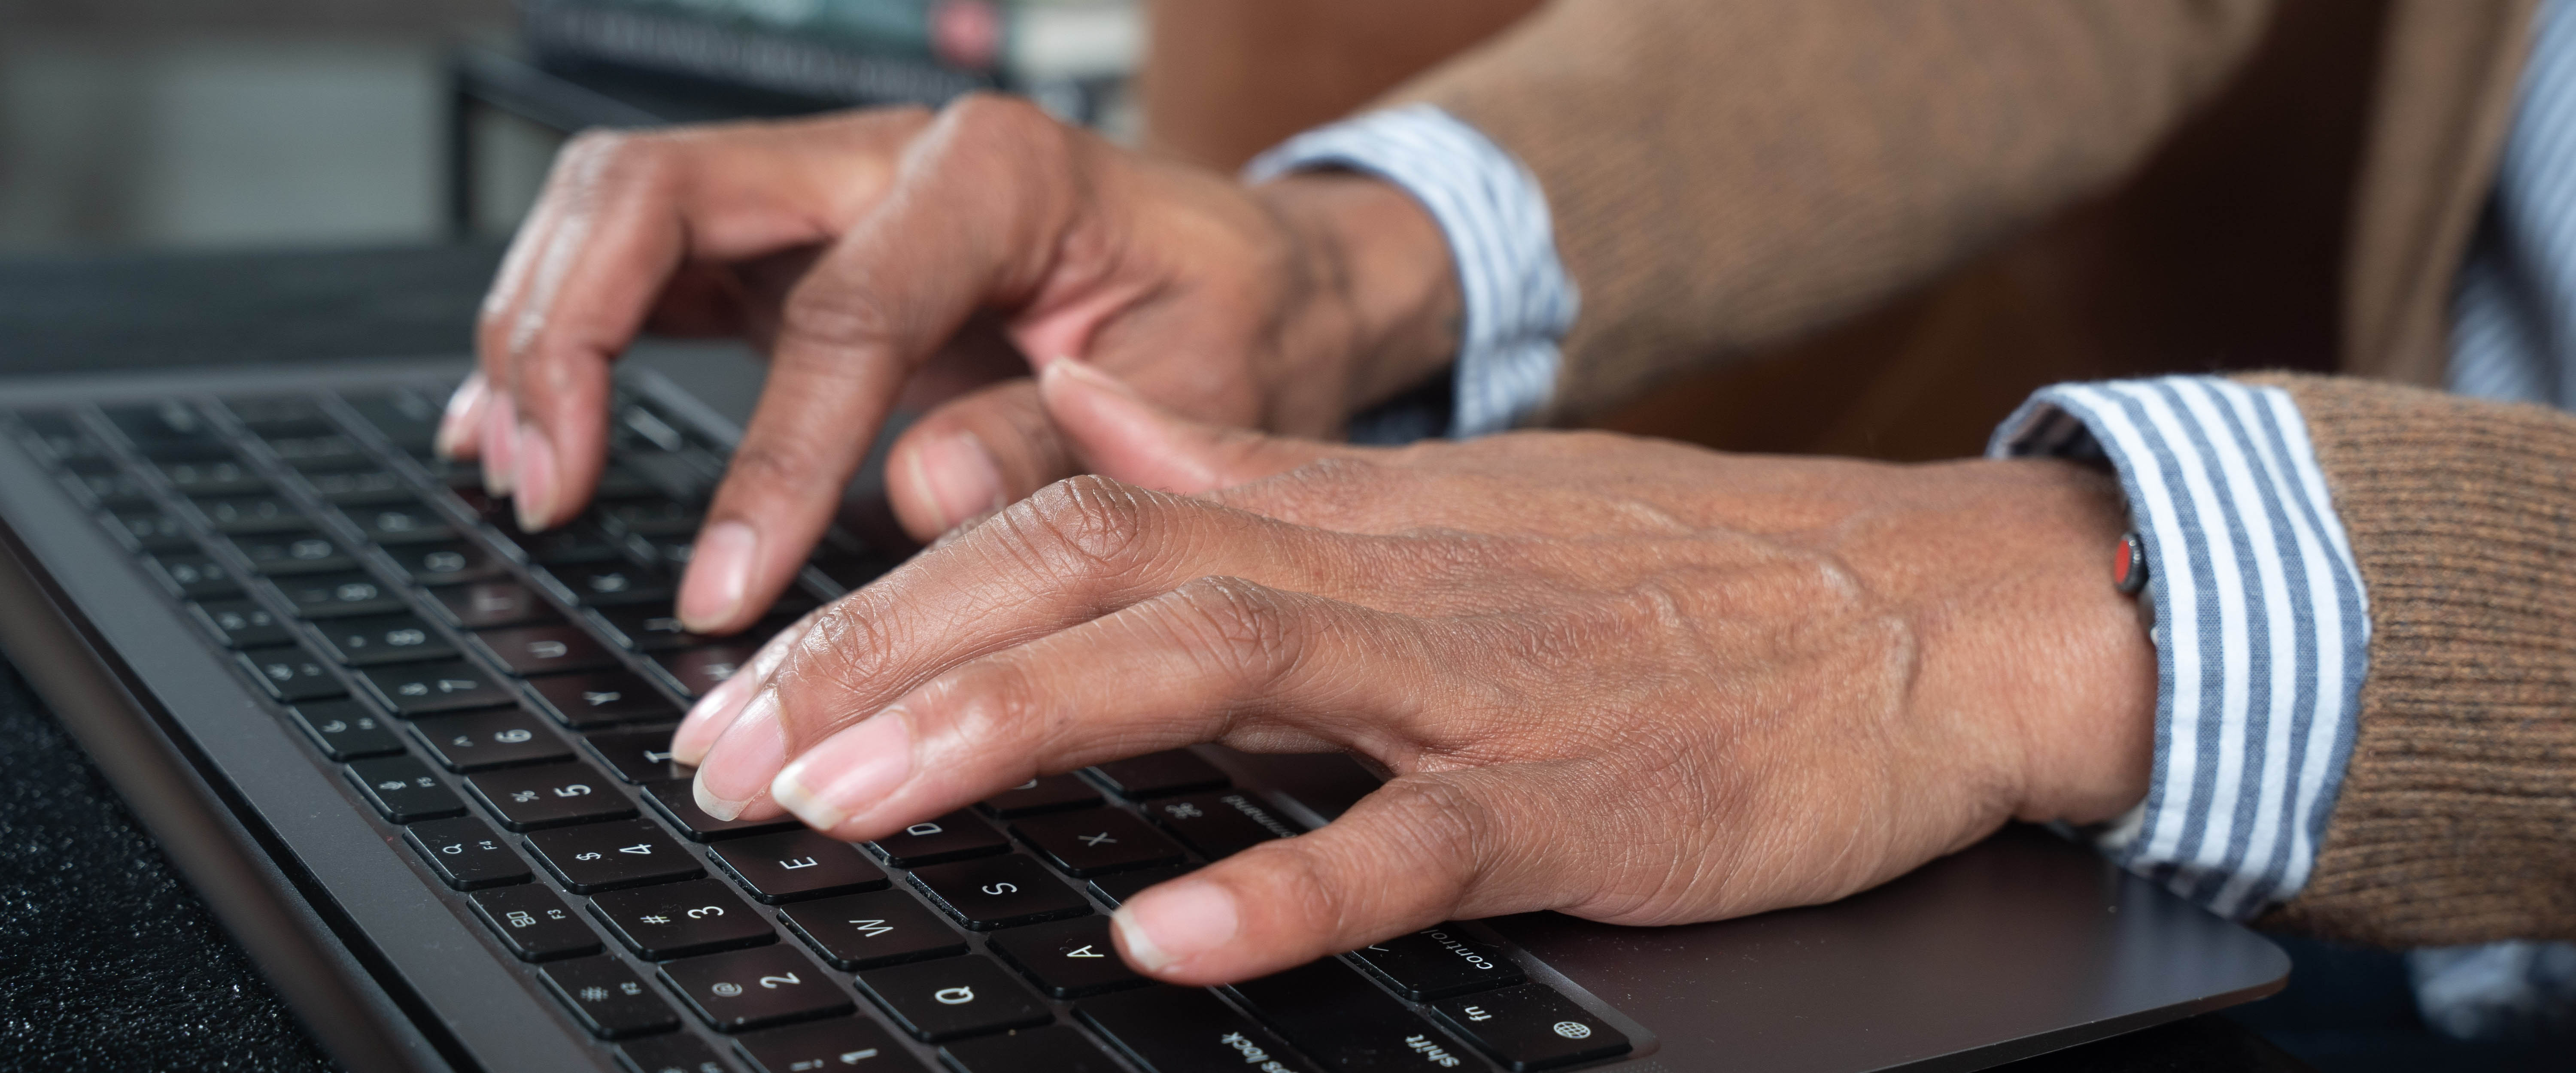 A close-up of hands typing on a keyboard